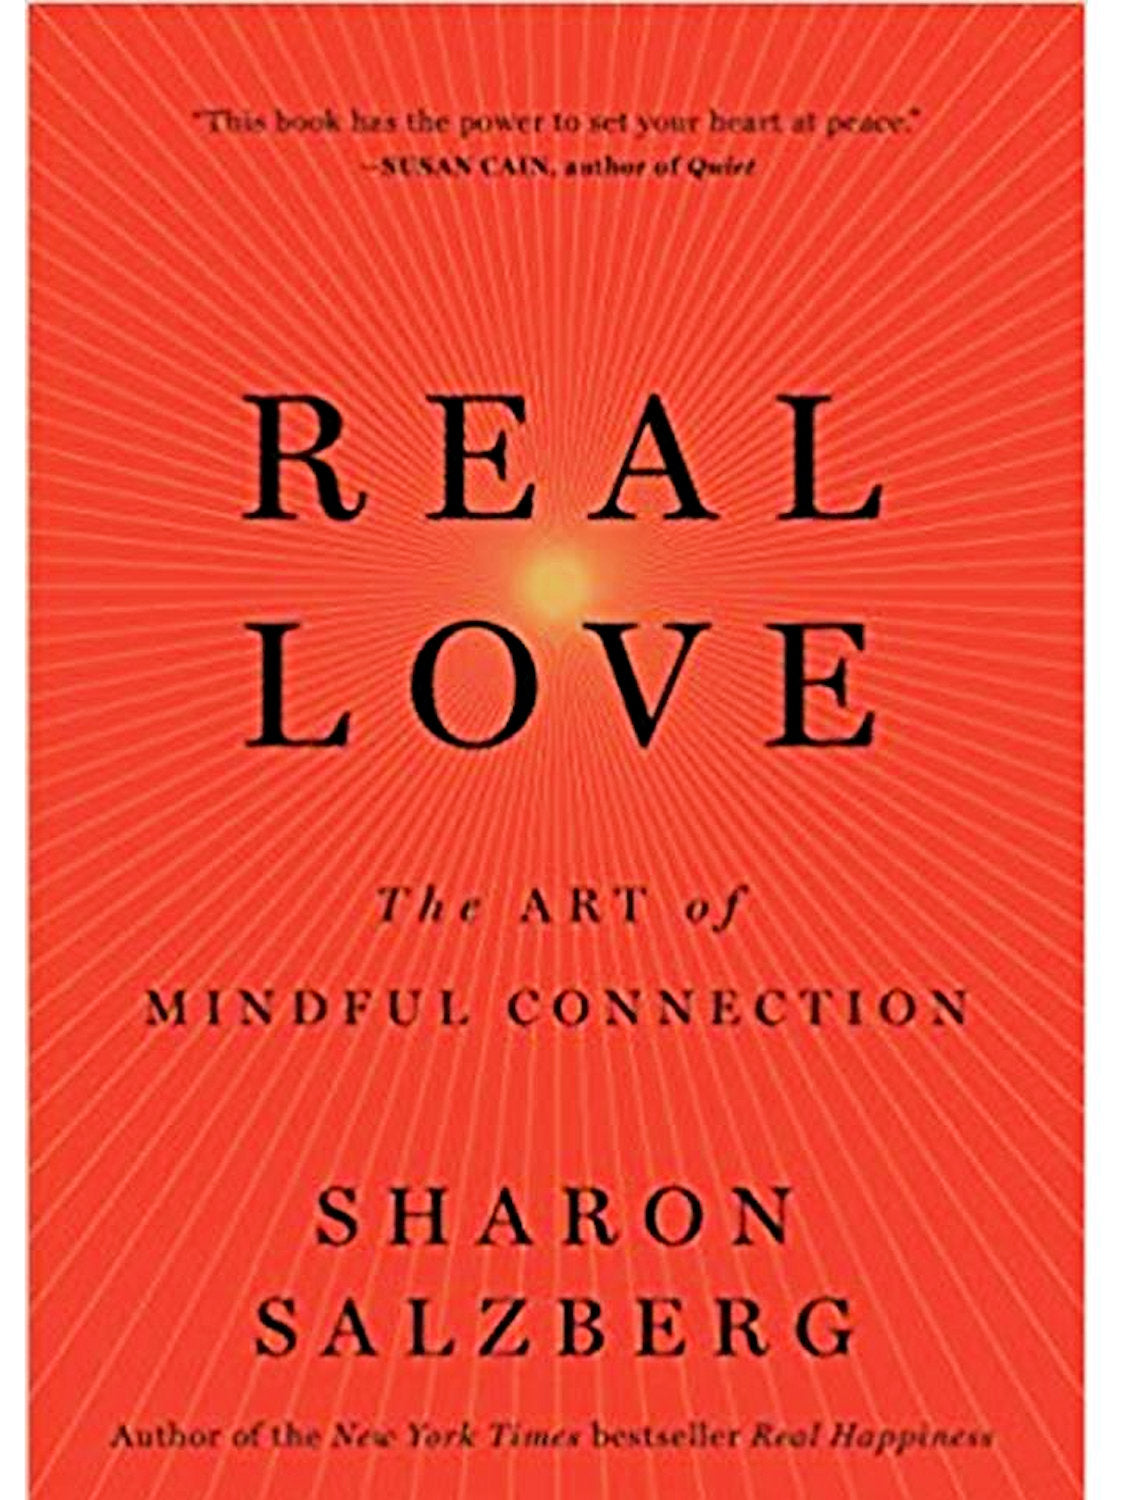 Real Love: The Art of Mindful Connection  by Sharon Salzberg